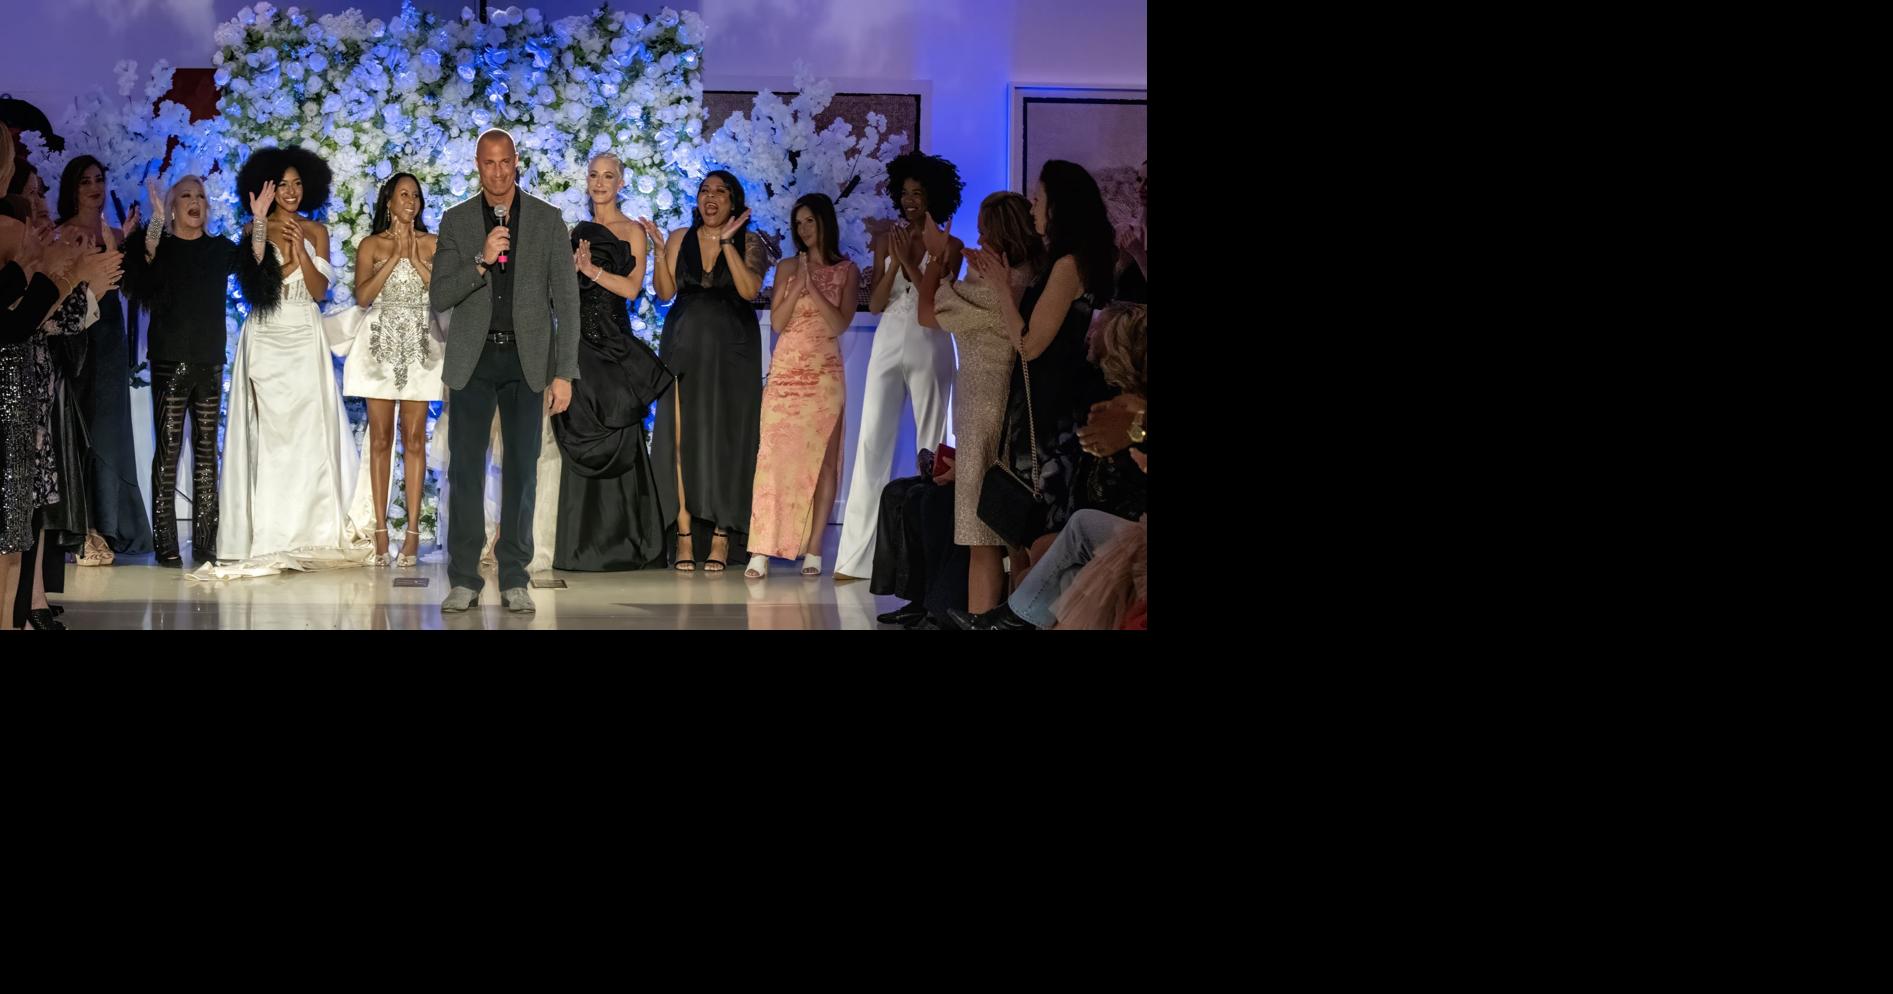 WINGS fashion show fundraiser helps survivors “BLOSSOM”